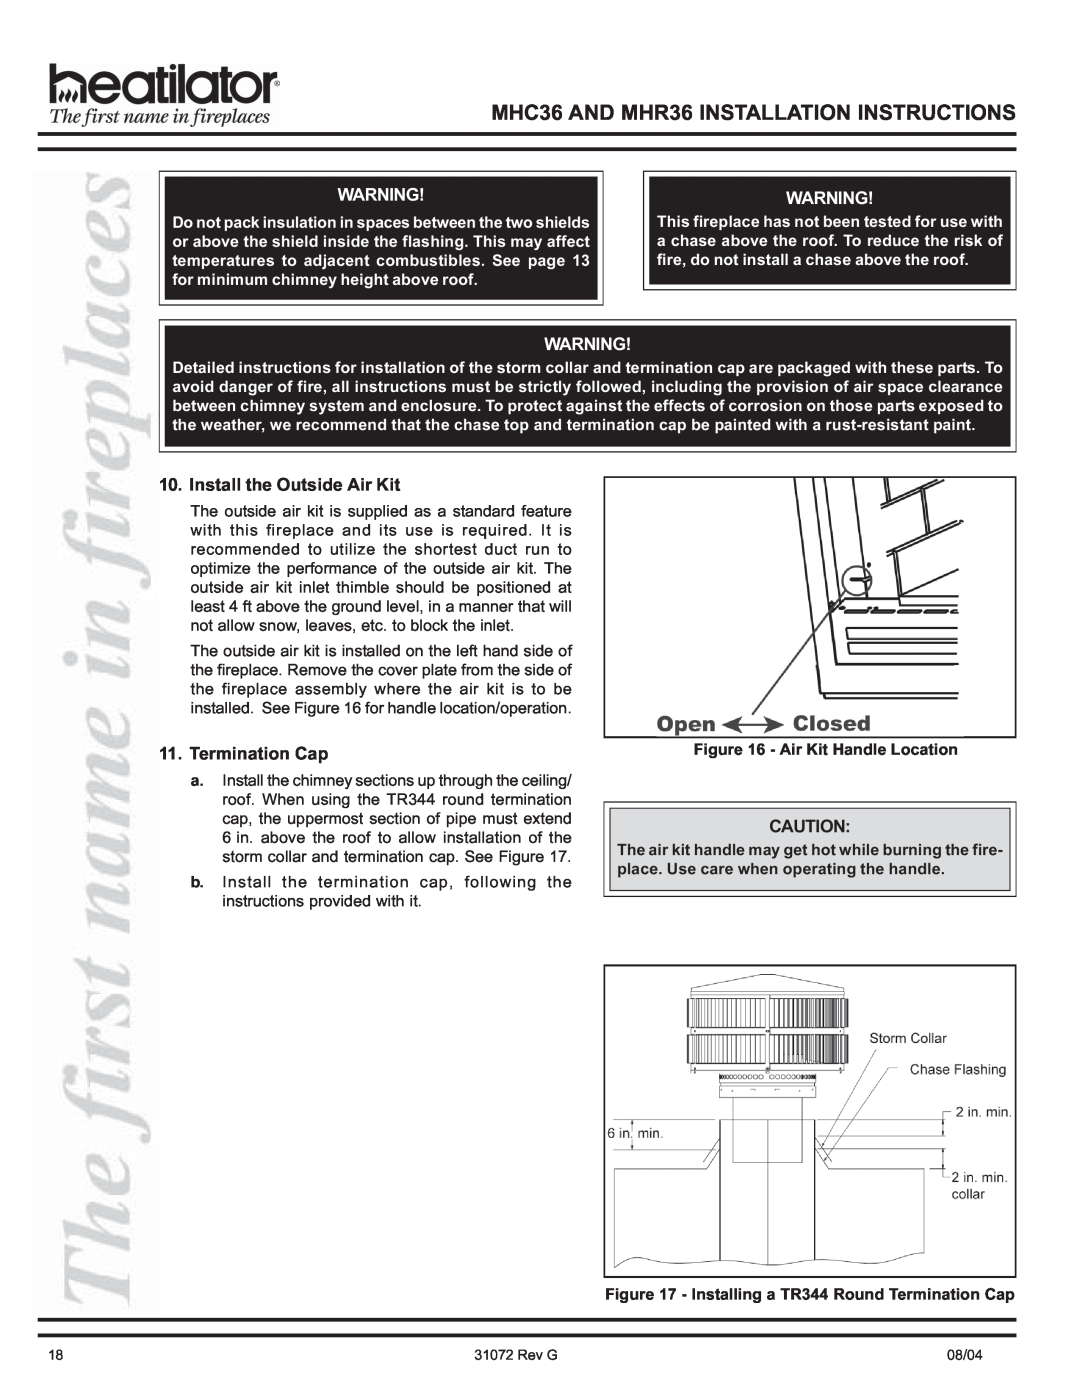 Heart & Home Collectables manual Install the Outside Air Kit, Termination Cap, MHC36 AND MHR36 INSTALLATION INSTRUCTIONS 